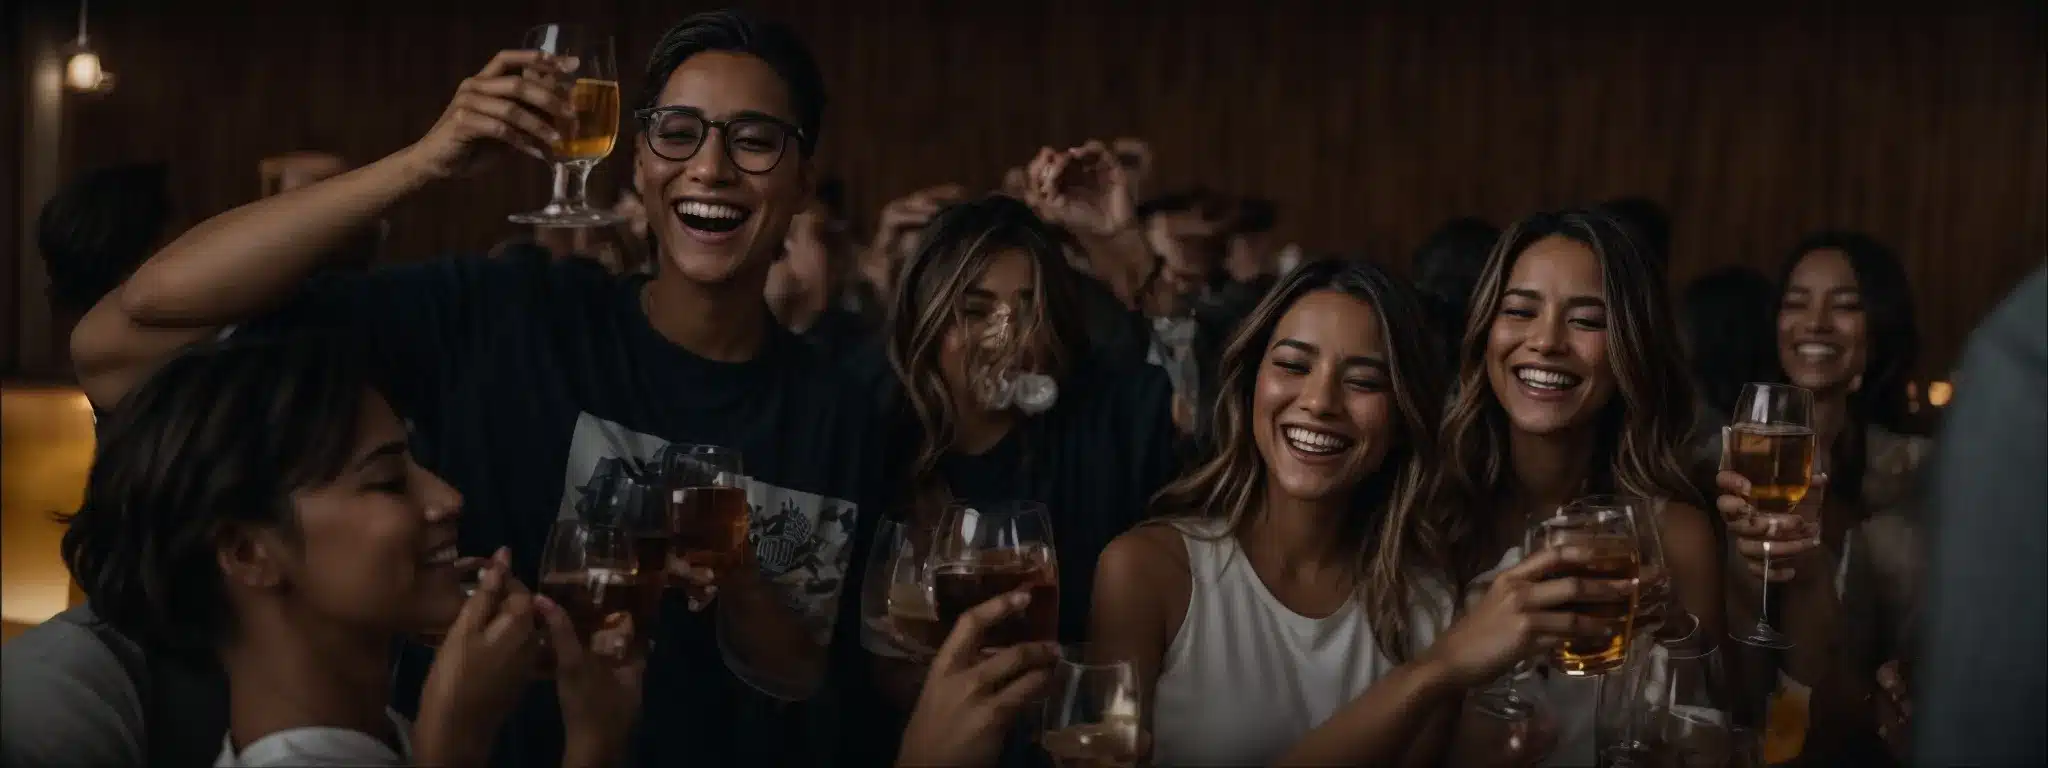 A Group Of Smiling People Wearing Branded Apparel Clinking Glasses In A Celebratory Toast.